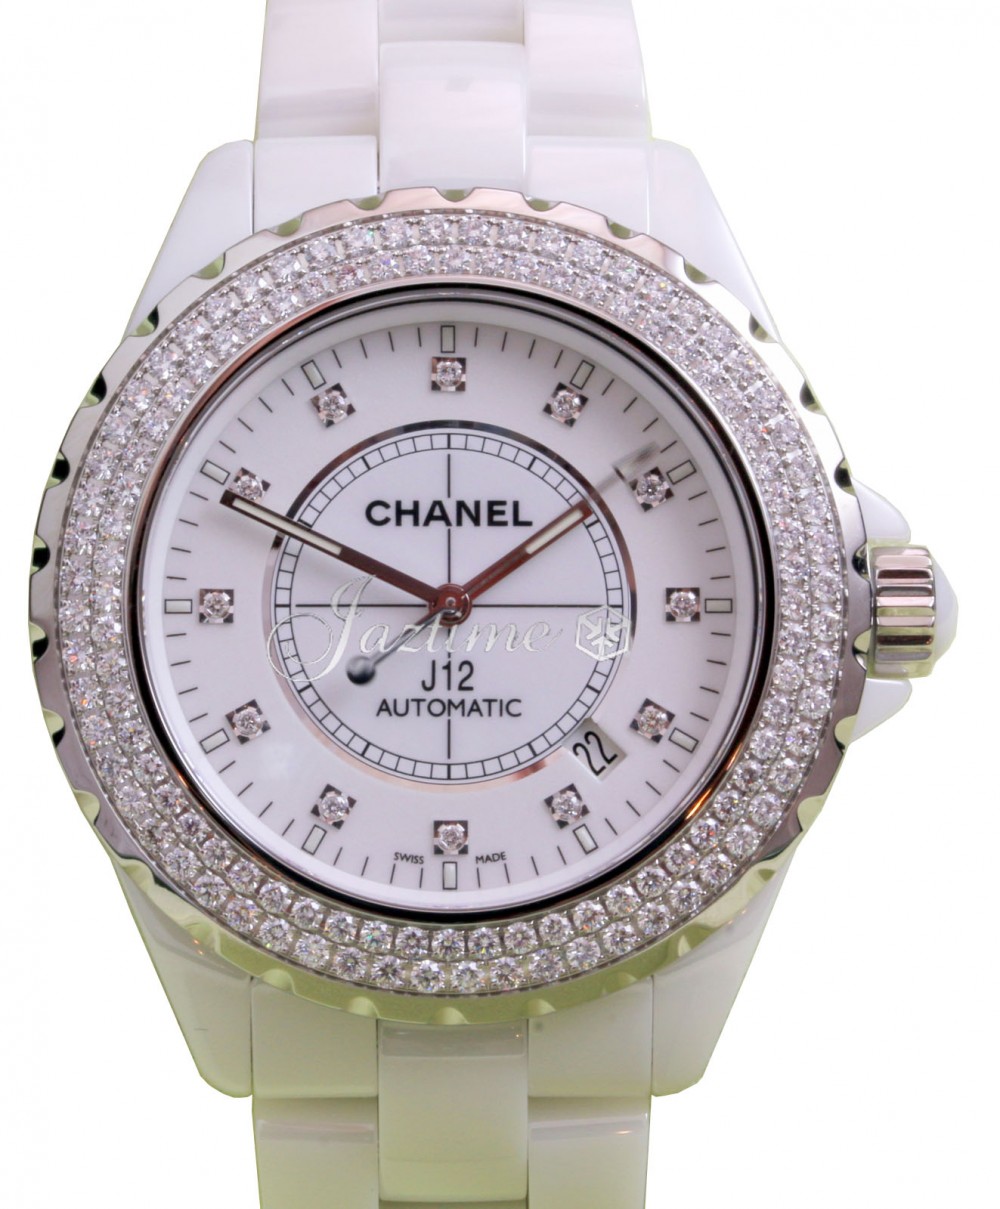 CHANEL CERMAIC J12 WITH DIAMOND DIAL